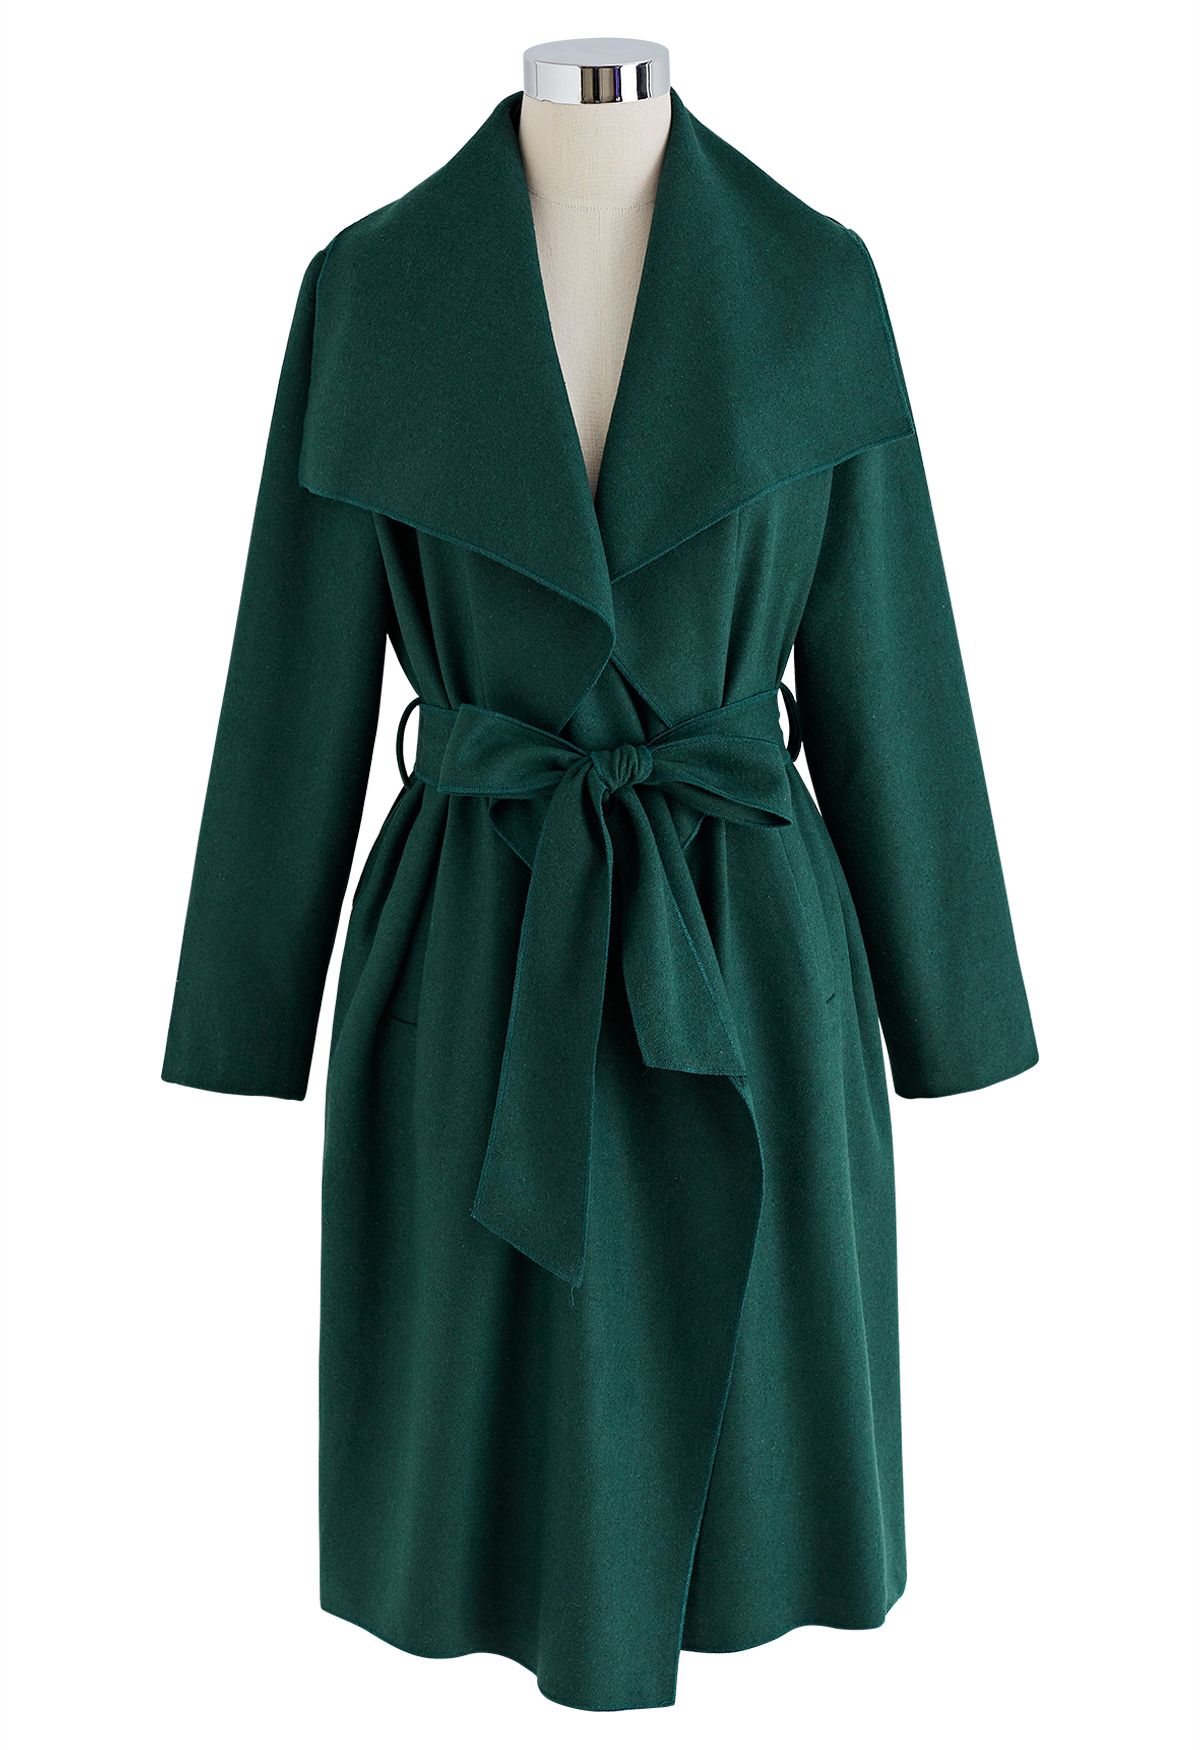 Free Myself Open Front Wool-Blend Coat in Emerald - Retro, Indie and ...